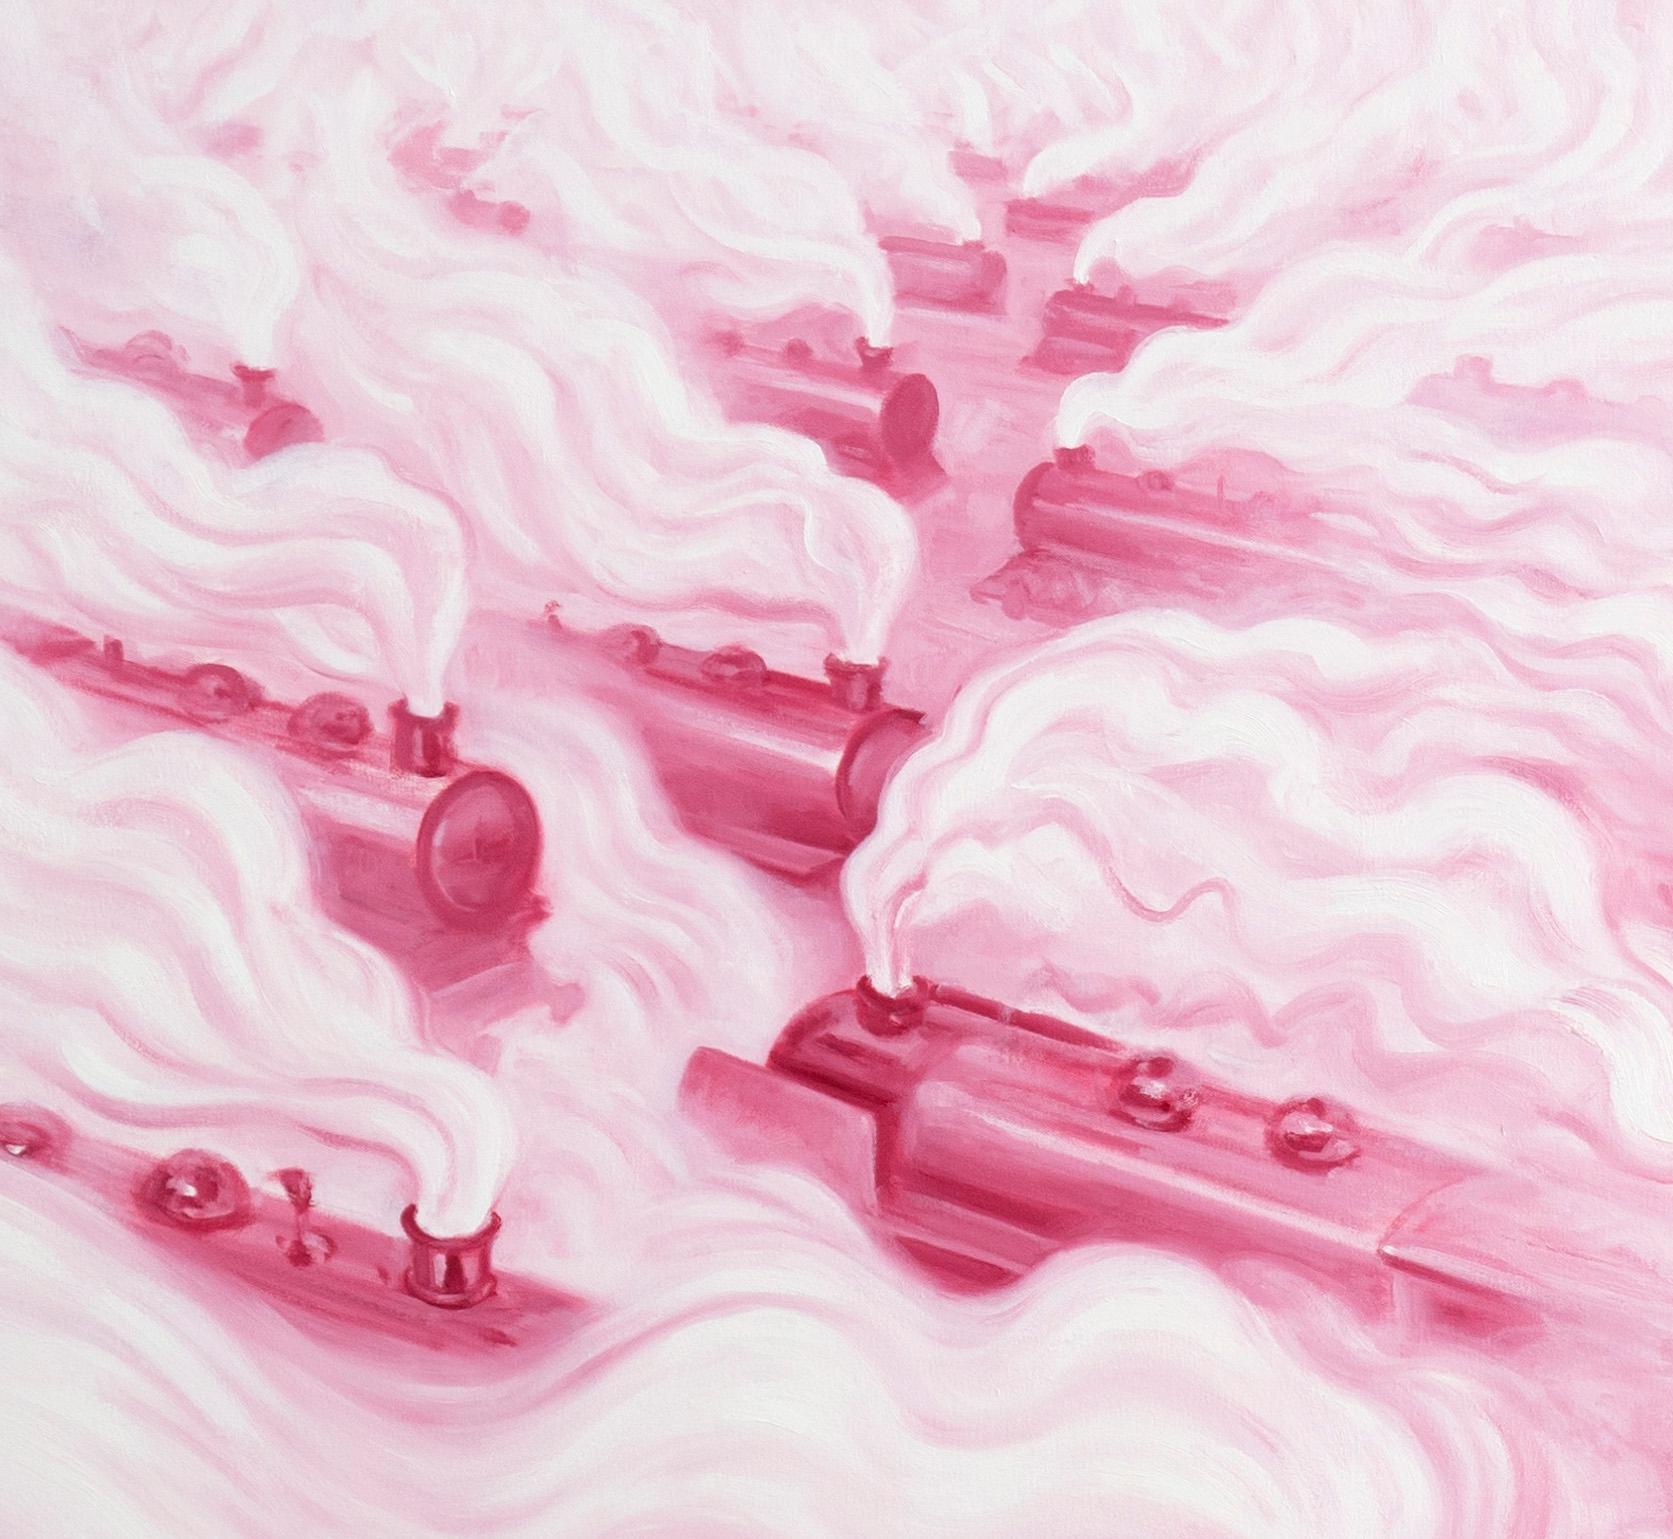 Pink Freud's Dream (Pink Freud and the Pleasant Horizon) (diptych in 2 panels) For Sale 5